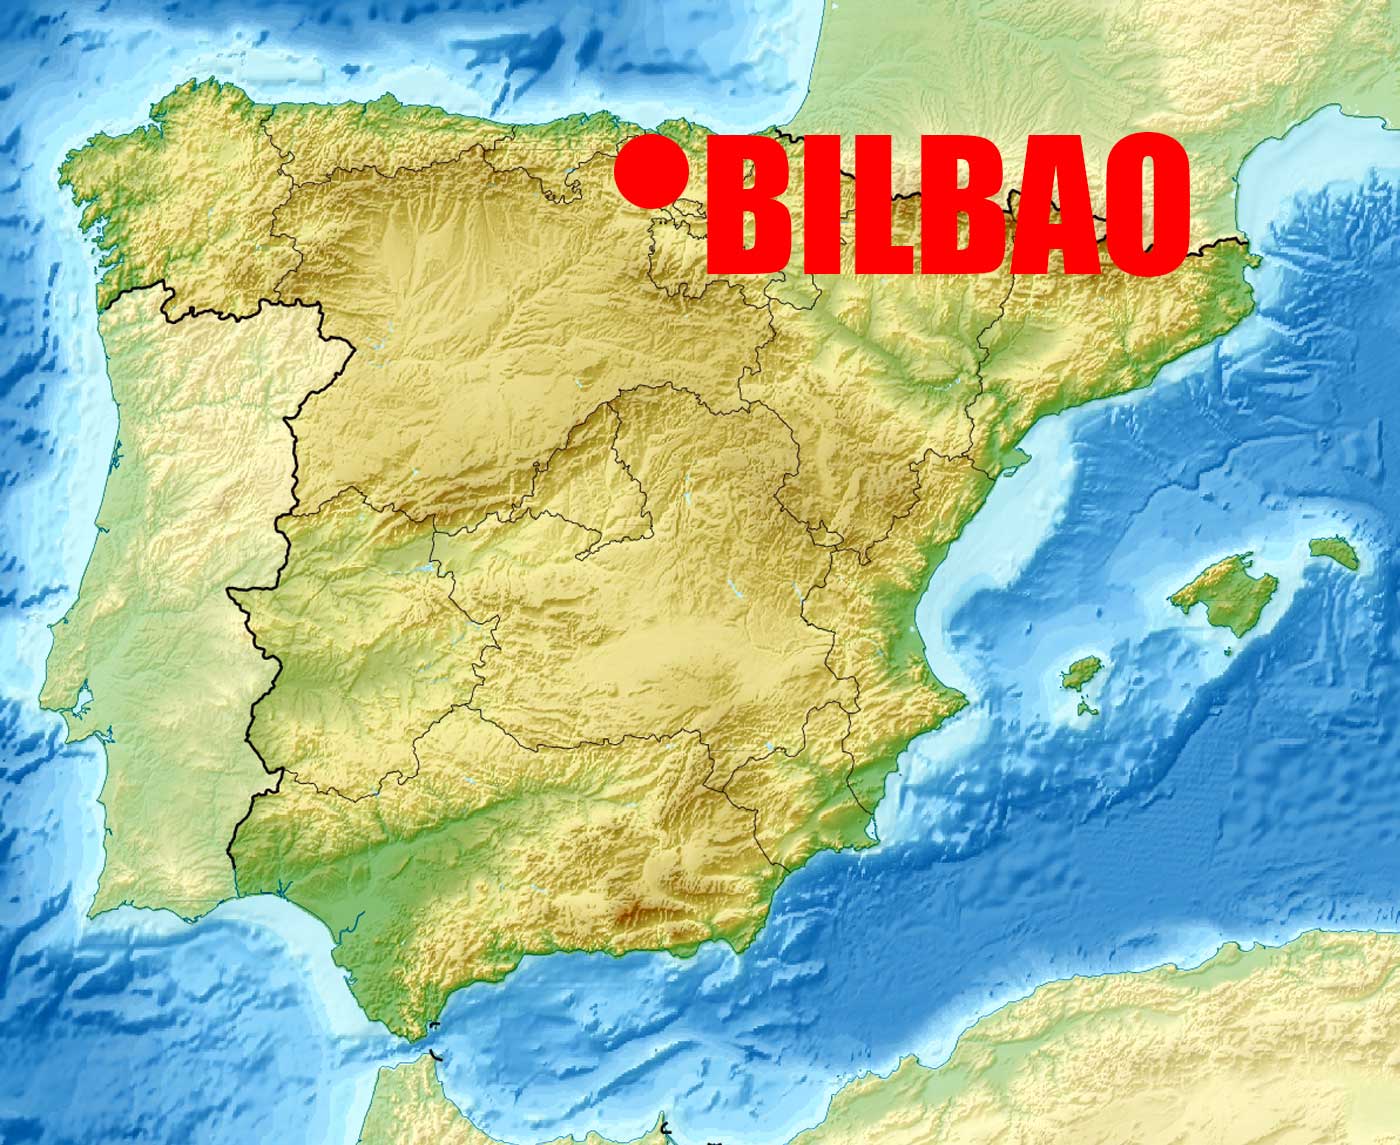 Location of Bilbao City on Spain Map